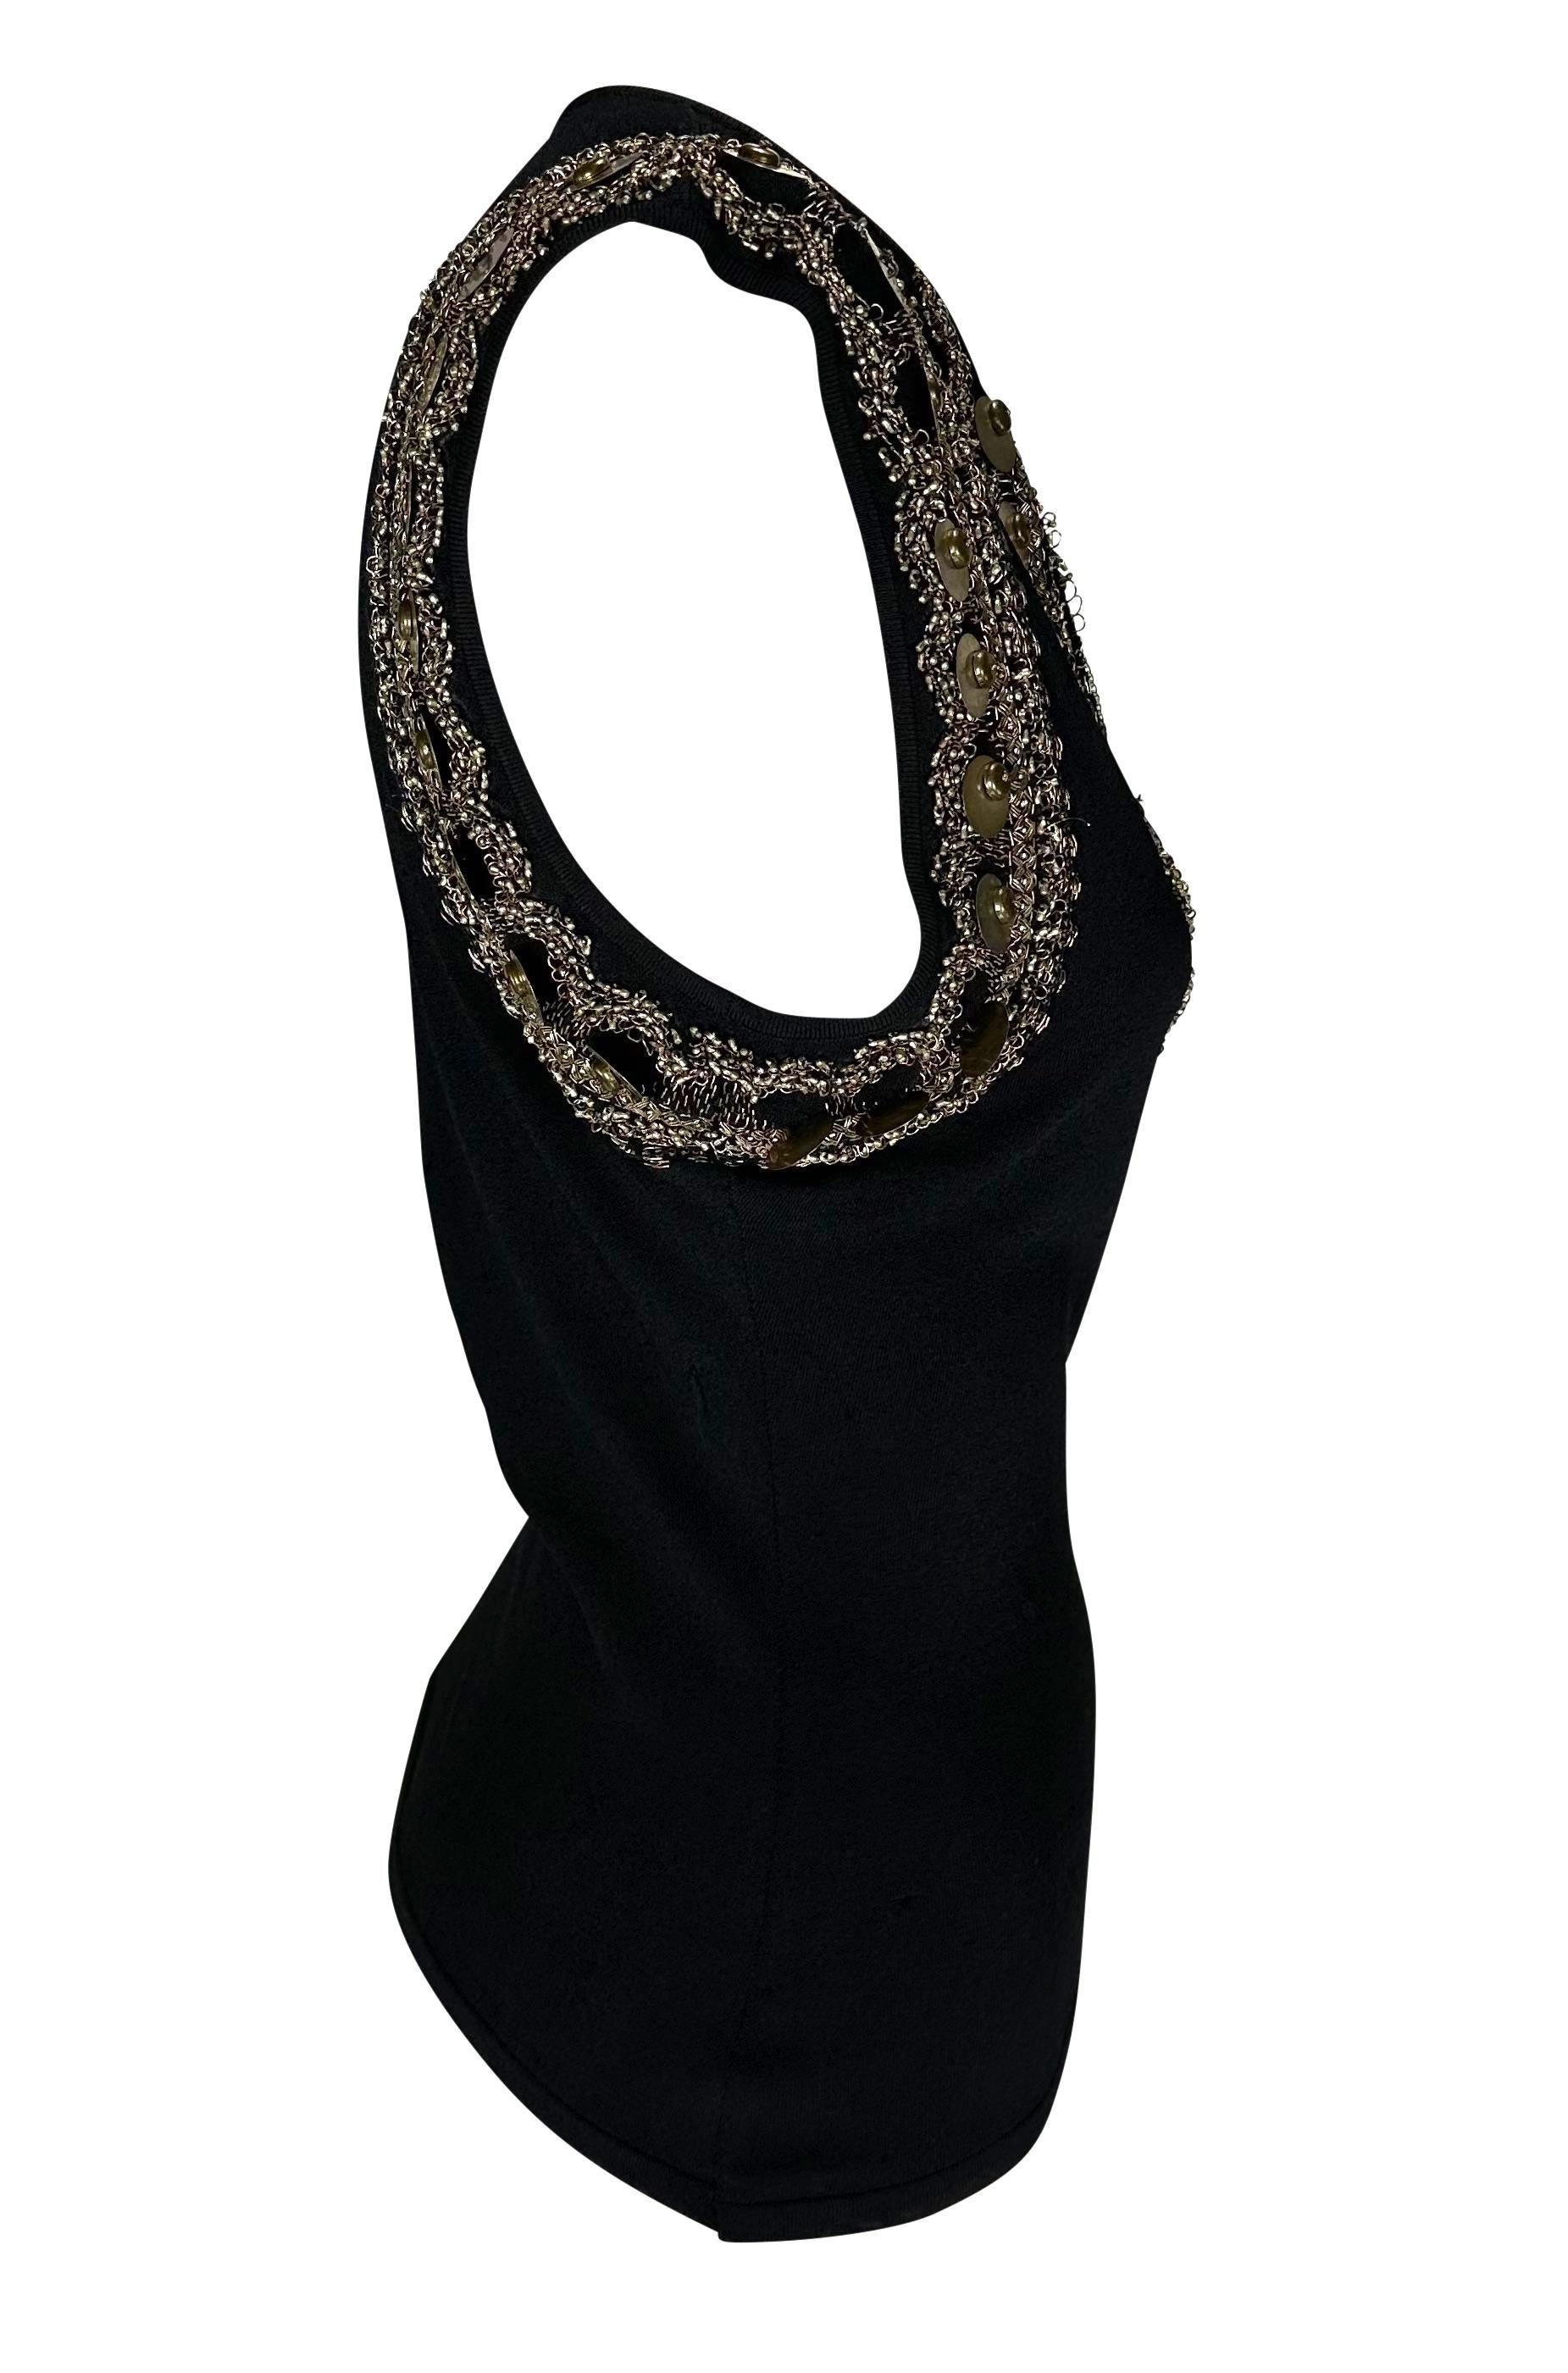 S/S 2004 Versace by Donatella Brass Embroidered Beaded Black Knit Plunging Top For Sale 1